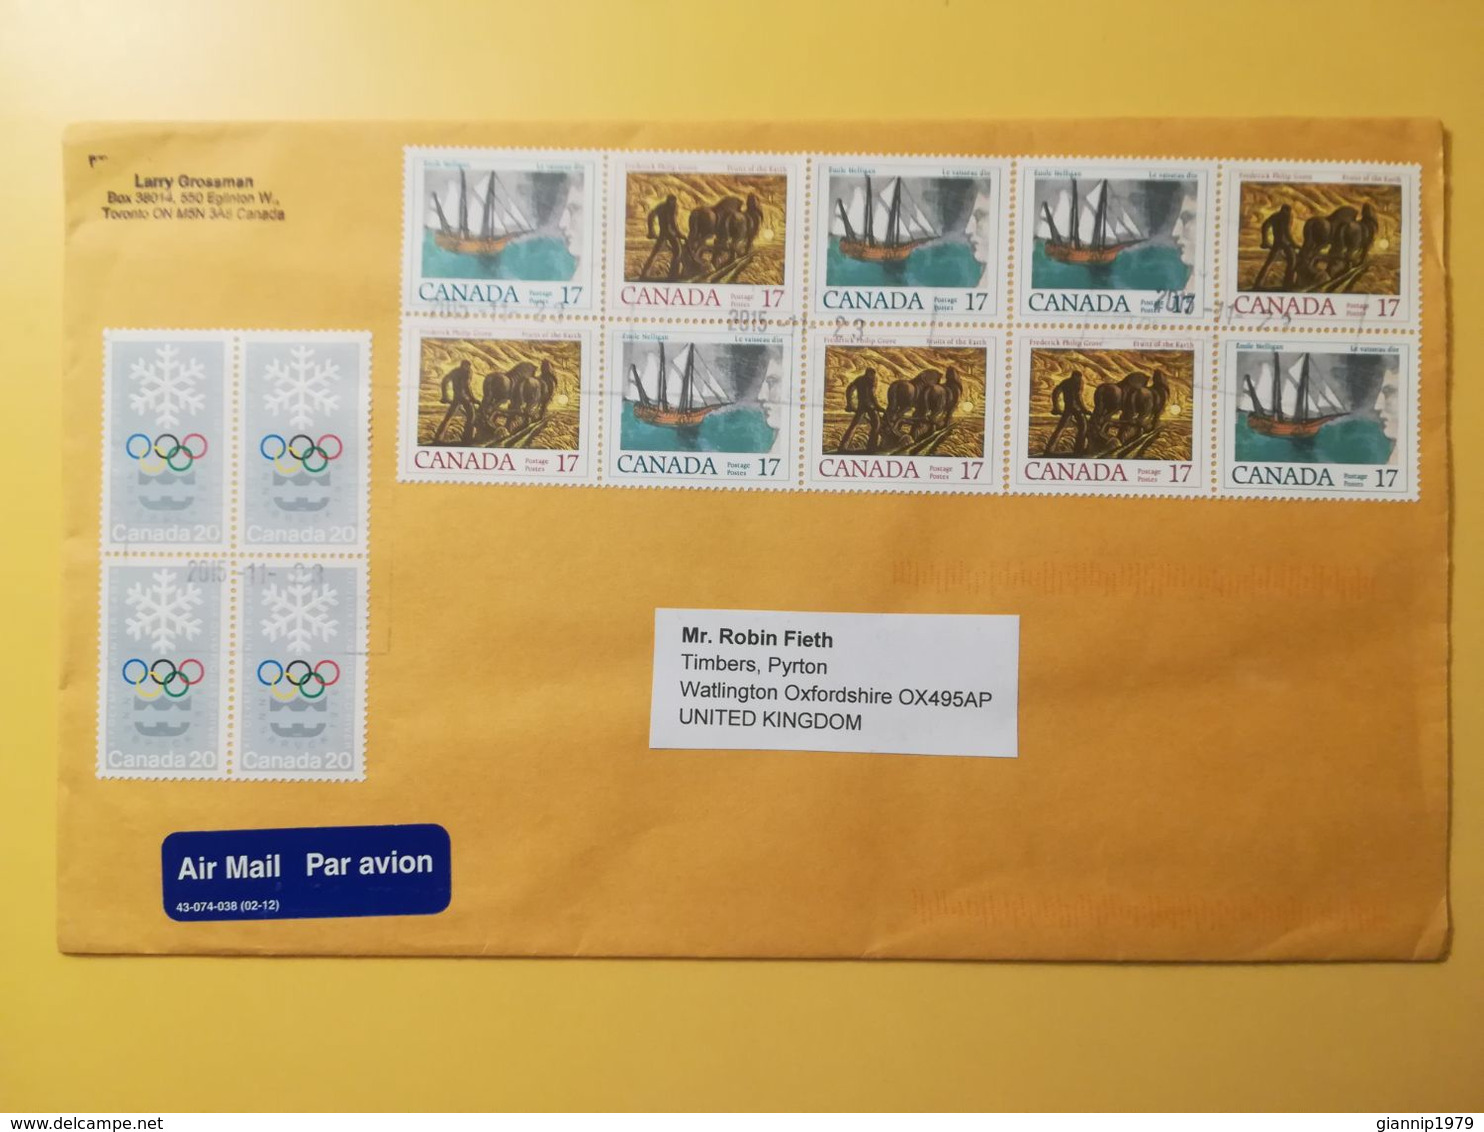 2015 BUSTA  AIR MAIL CANADA  BOLLO CANADIAN WRITERS GIOCHI PLIMPICI INVERNALI OLYMPIC GAMES ANNULLO OBLITERE' - Covers & Documents